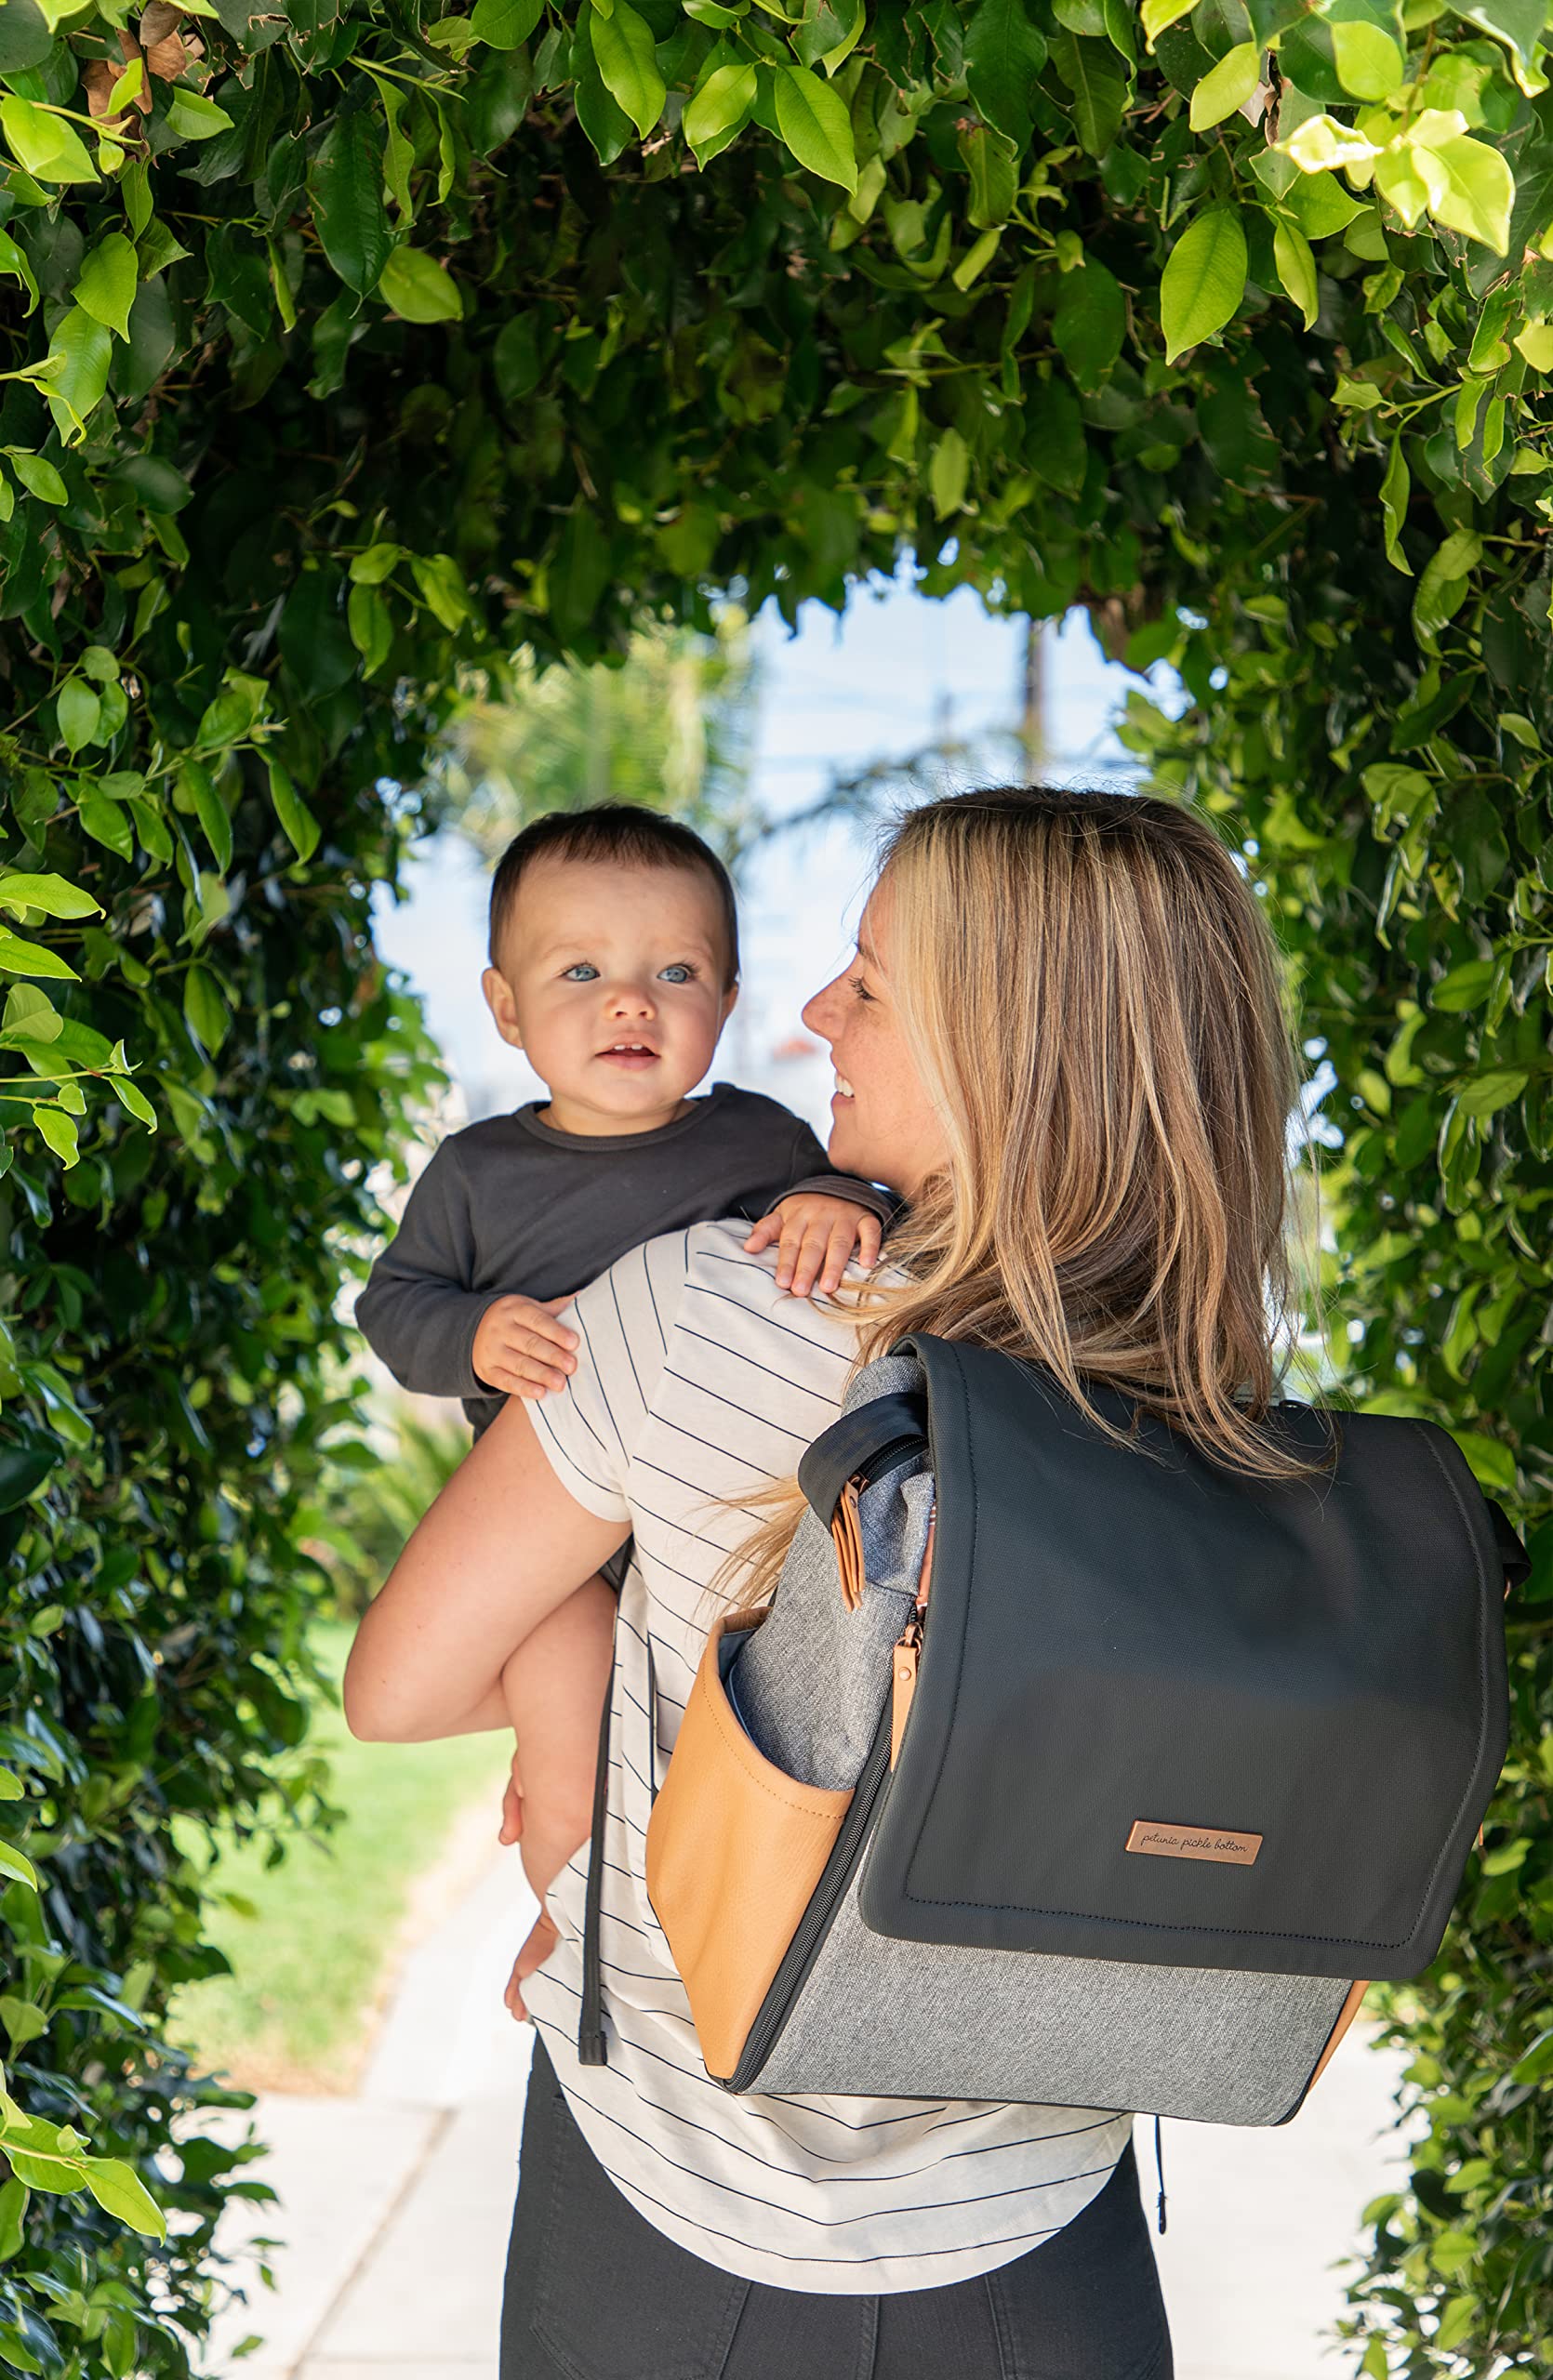 Petunia Pickle Bottom Boxy Backpack | Diaper Bag | Diaper Bag Backpack for Parents | Top-Selling Stylish Baby Bag | Sophisticated and Spacious Backpack for On The Go Moms | Camel/Graphite